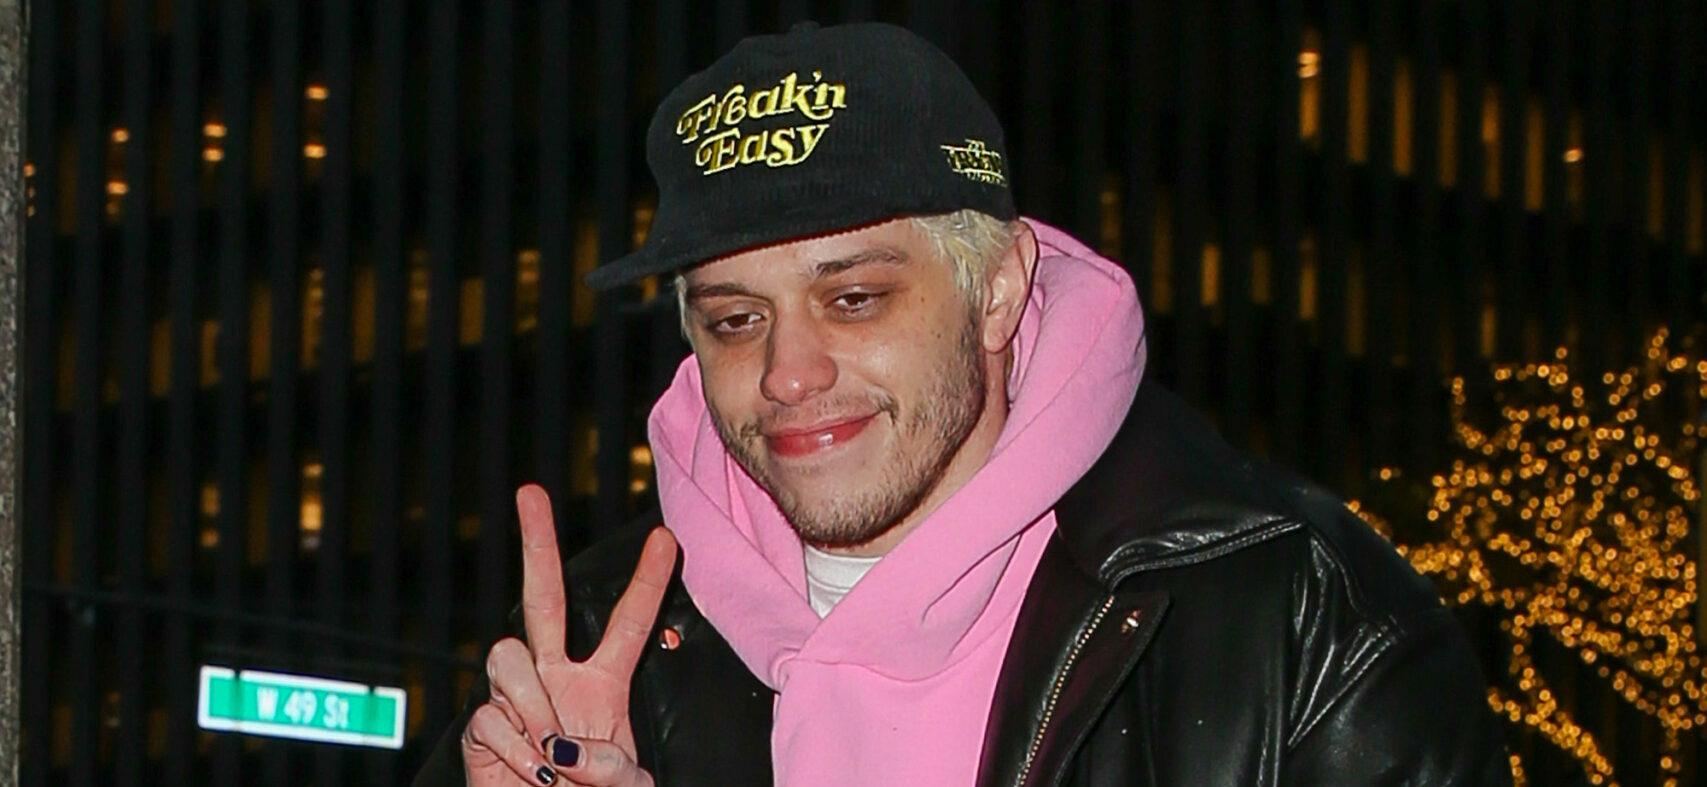 Pete Davidson seen at the NBC studios for his appearance at The Tonight Show Starring Jimmy Fallon in New York City.